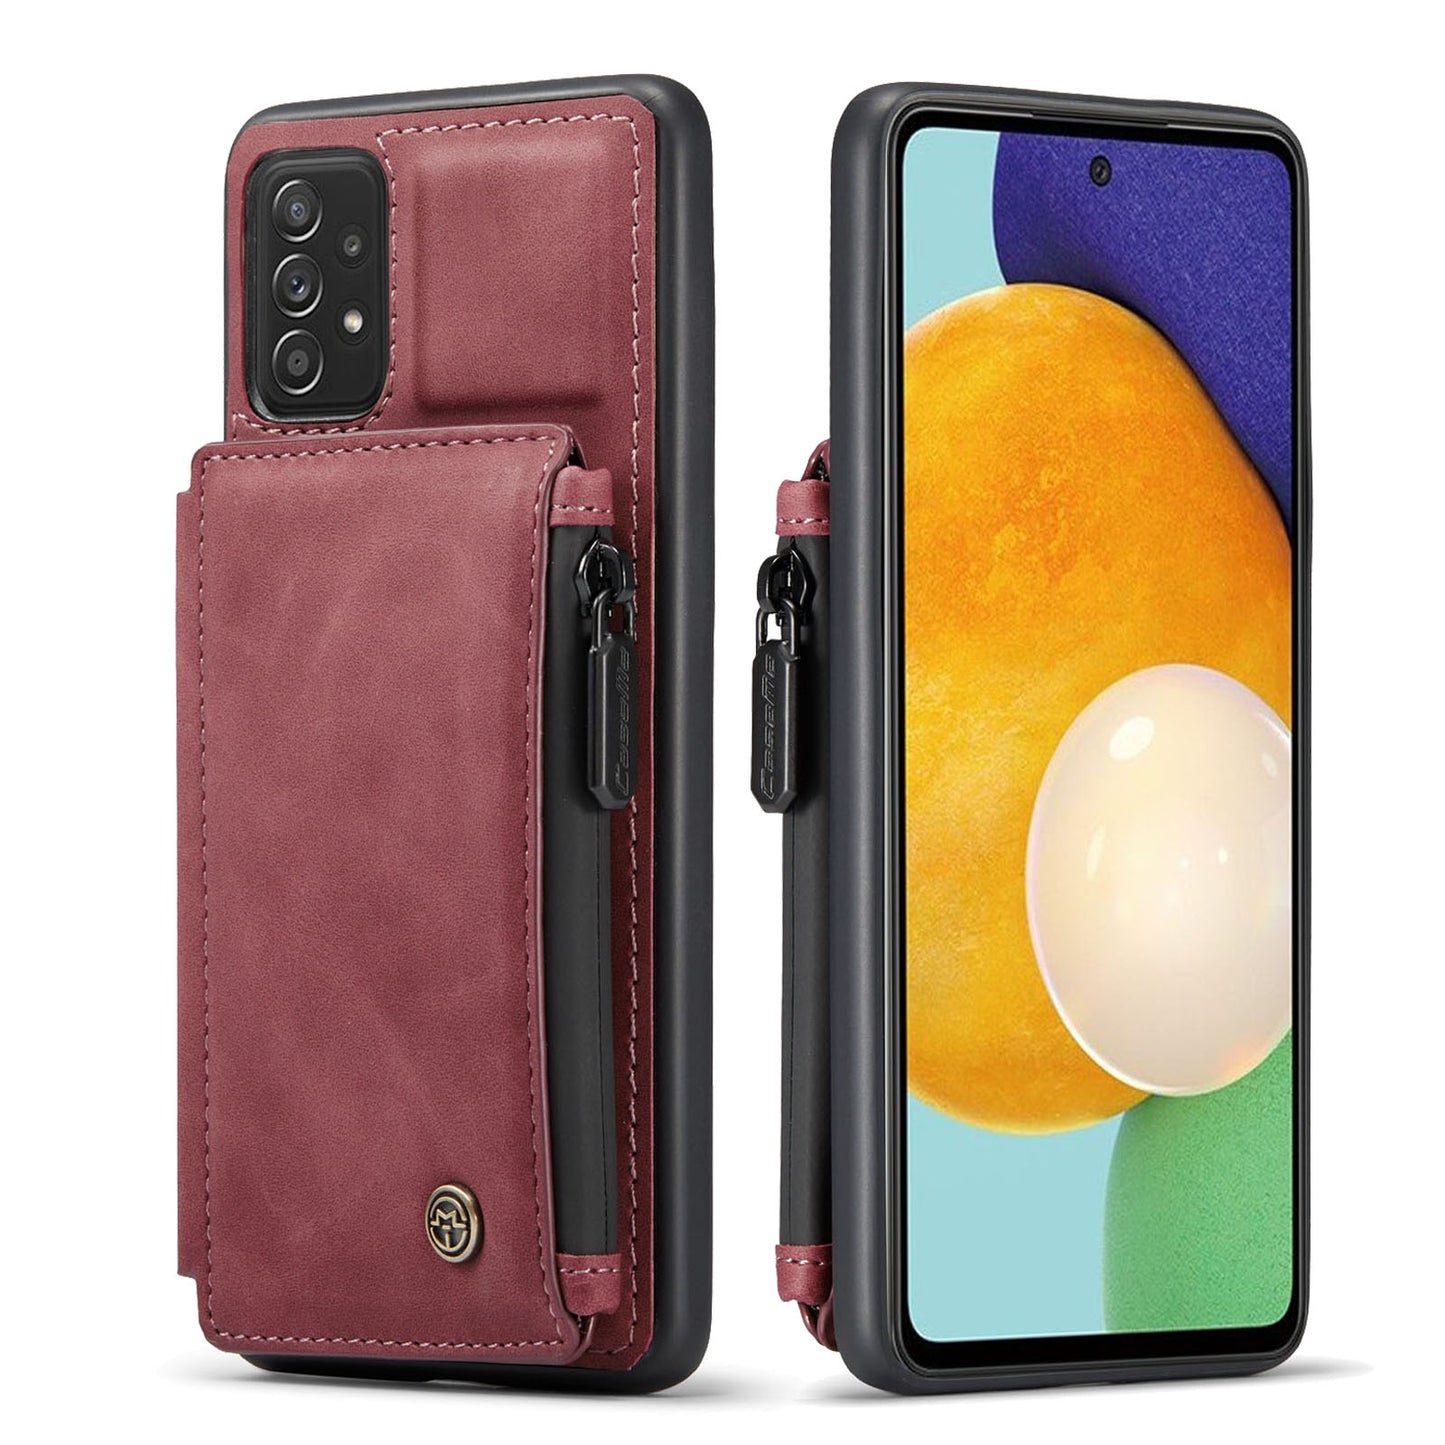 Wrist Strap Anti-theft Galaxy A52s Leather Cover Back RFID Blocking Card Holder Zipper